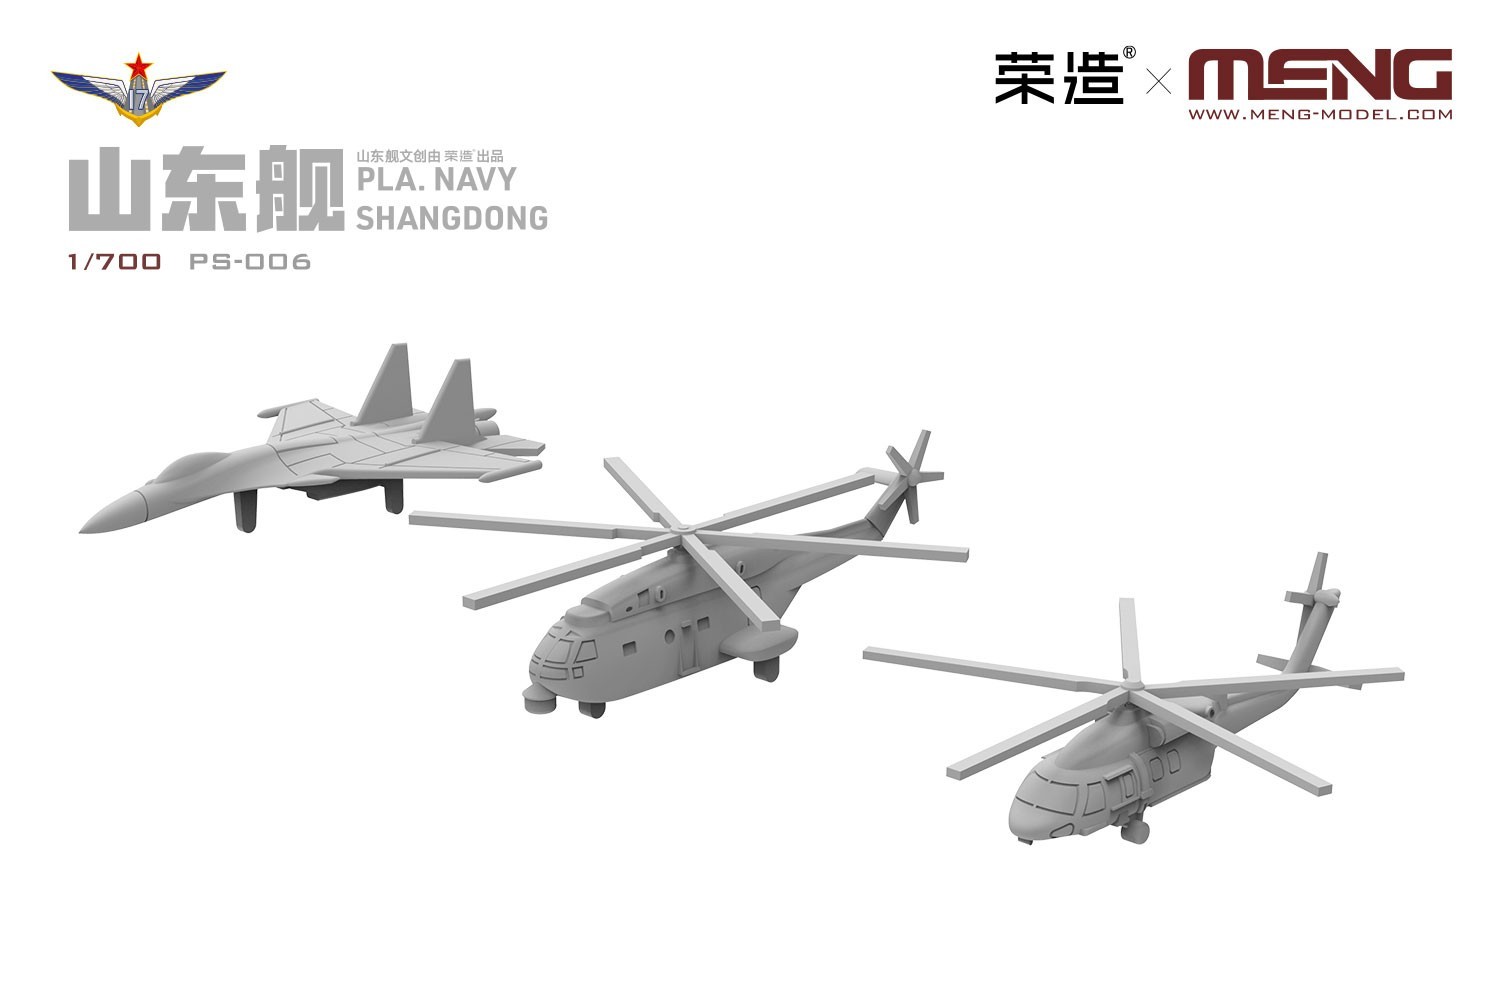 This kit includes carrier-based aircraft like J-15, Z-18 and Z-20.